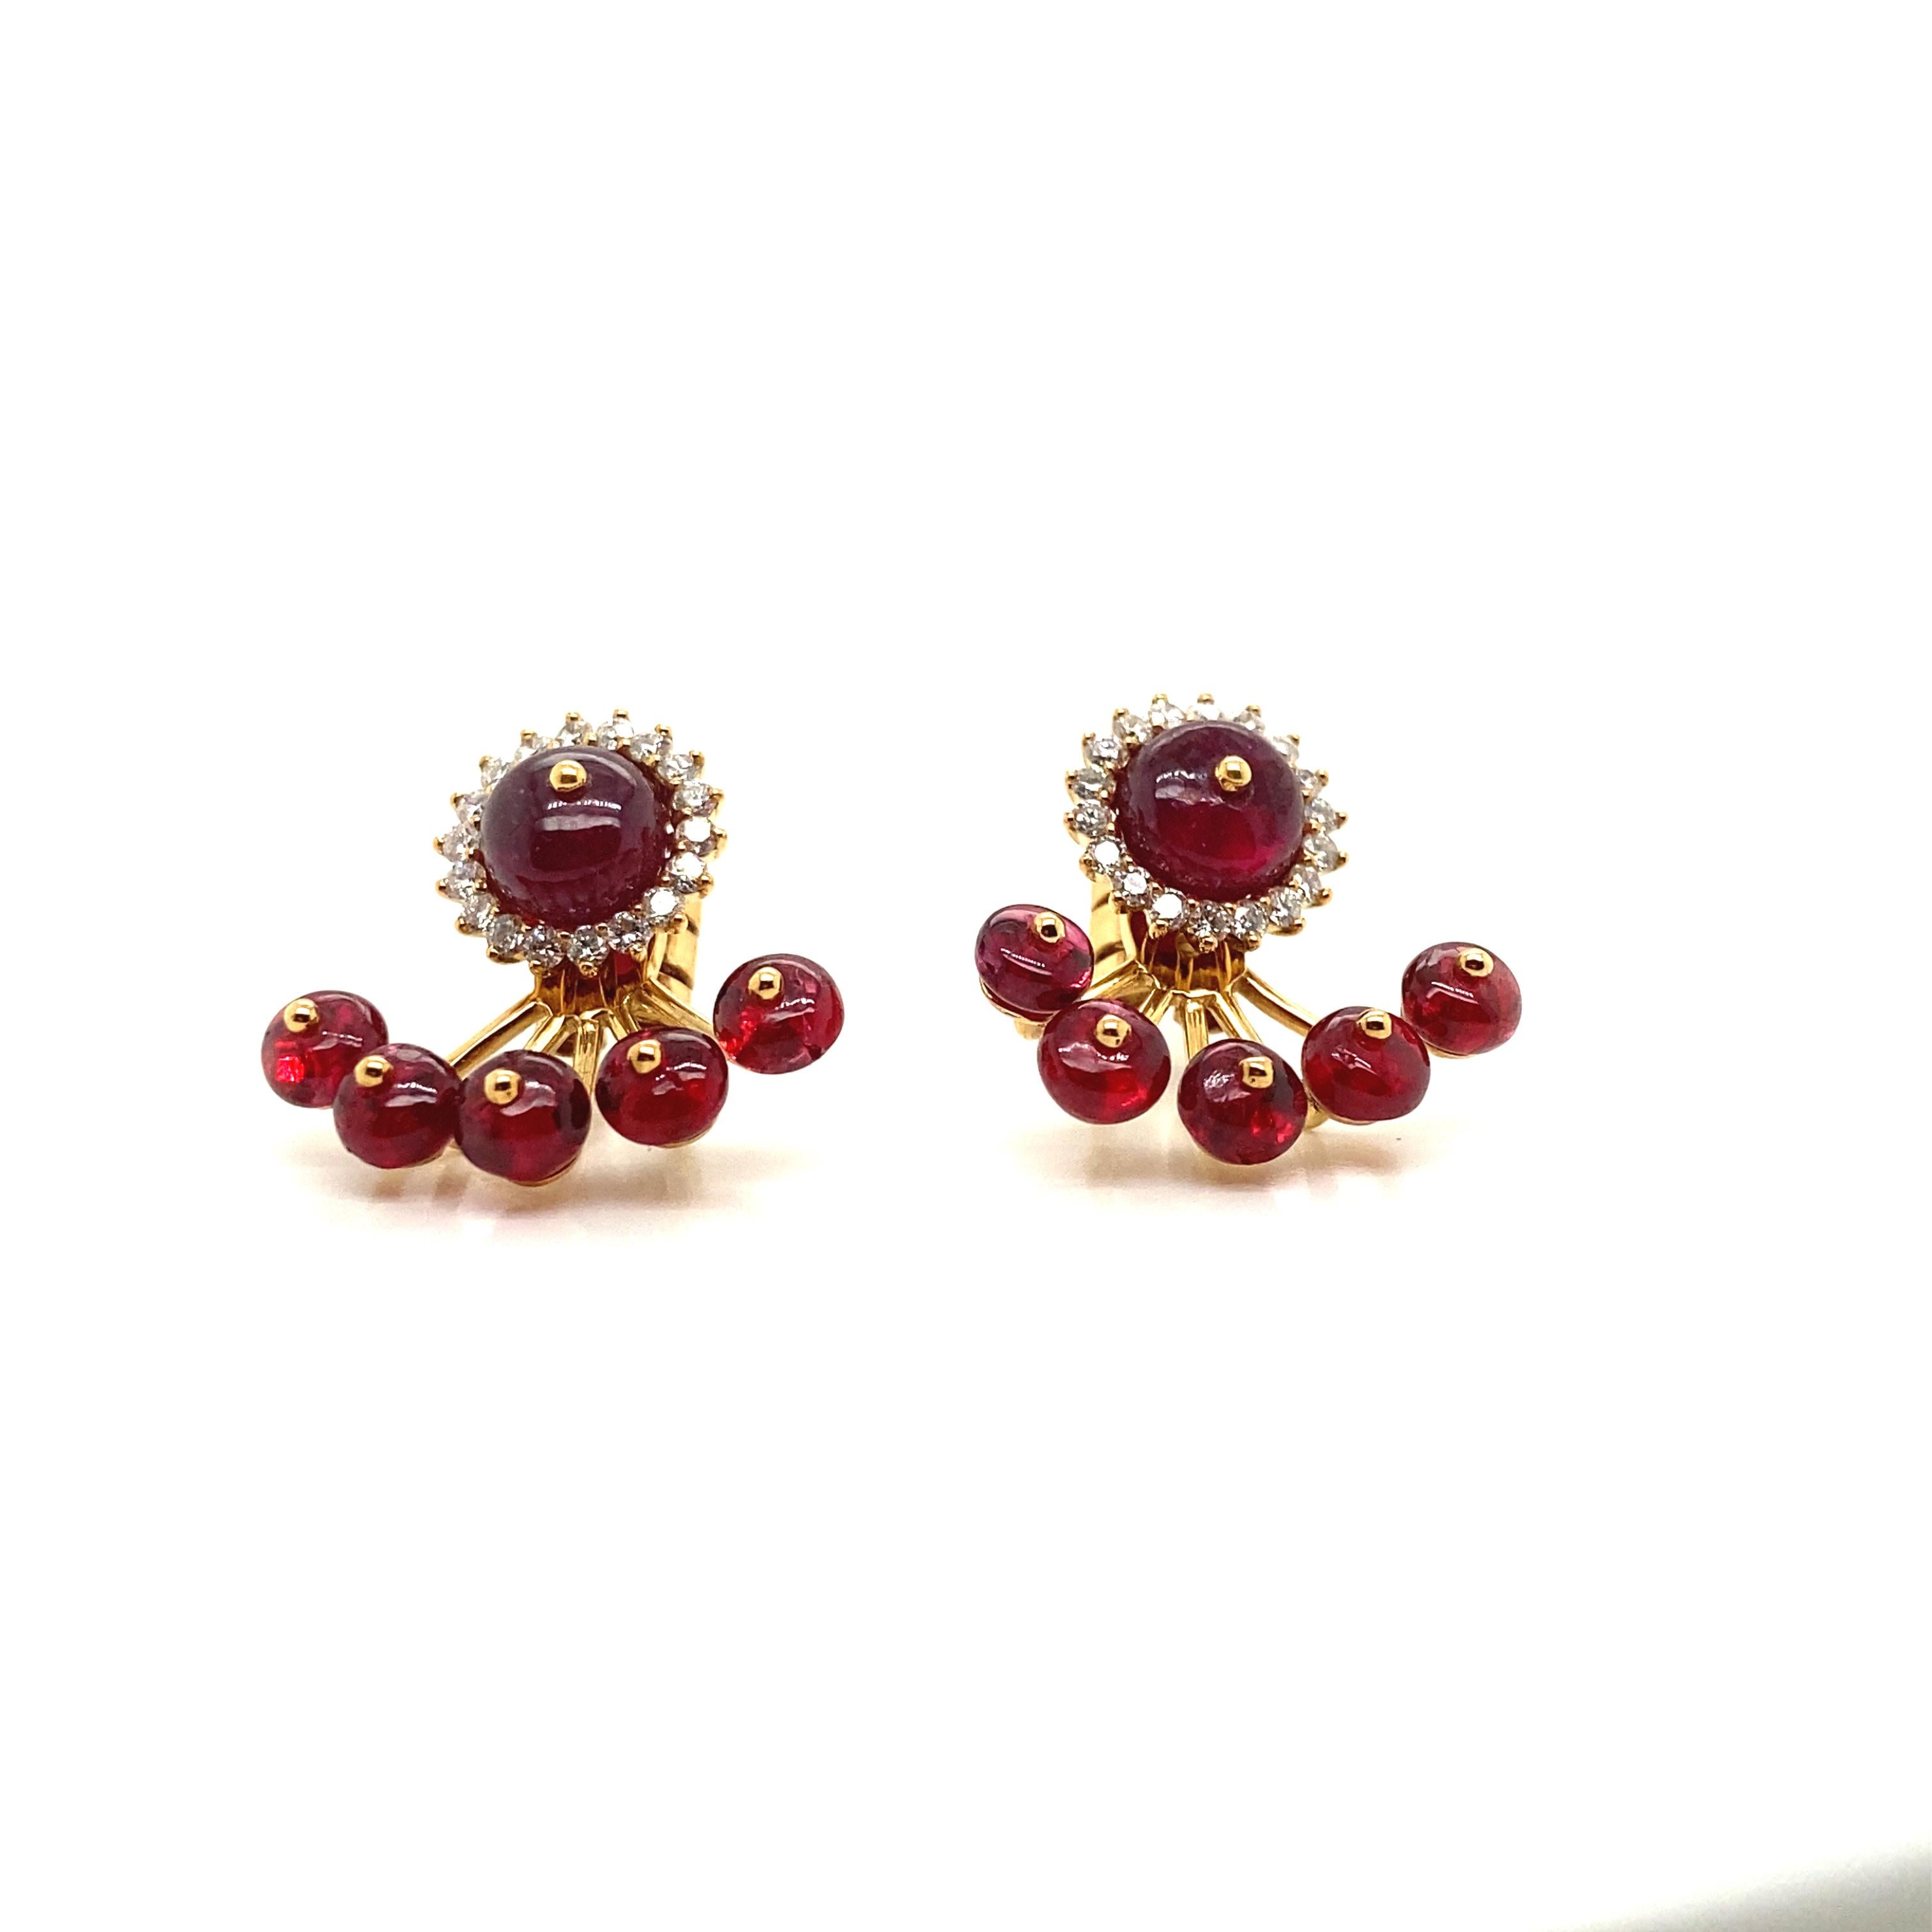 12.98 Carat Natural Red Spinel Beads and Diamond Gold Earrings For Sale 1